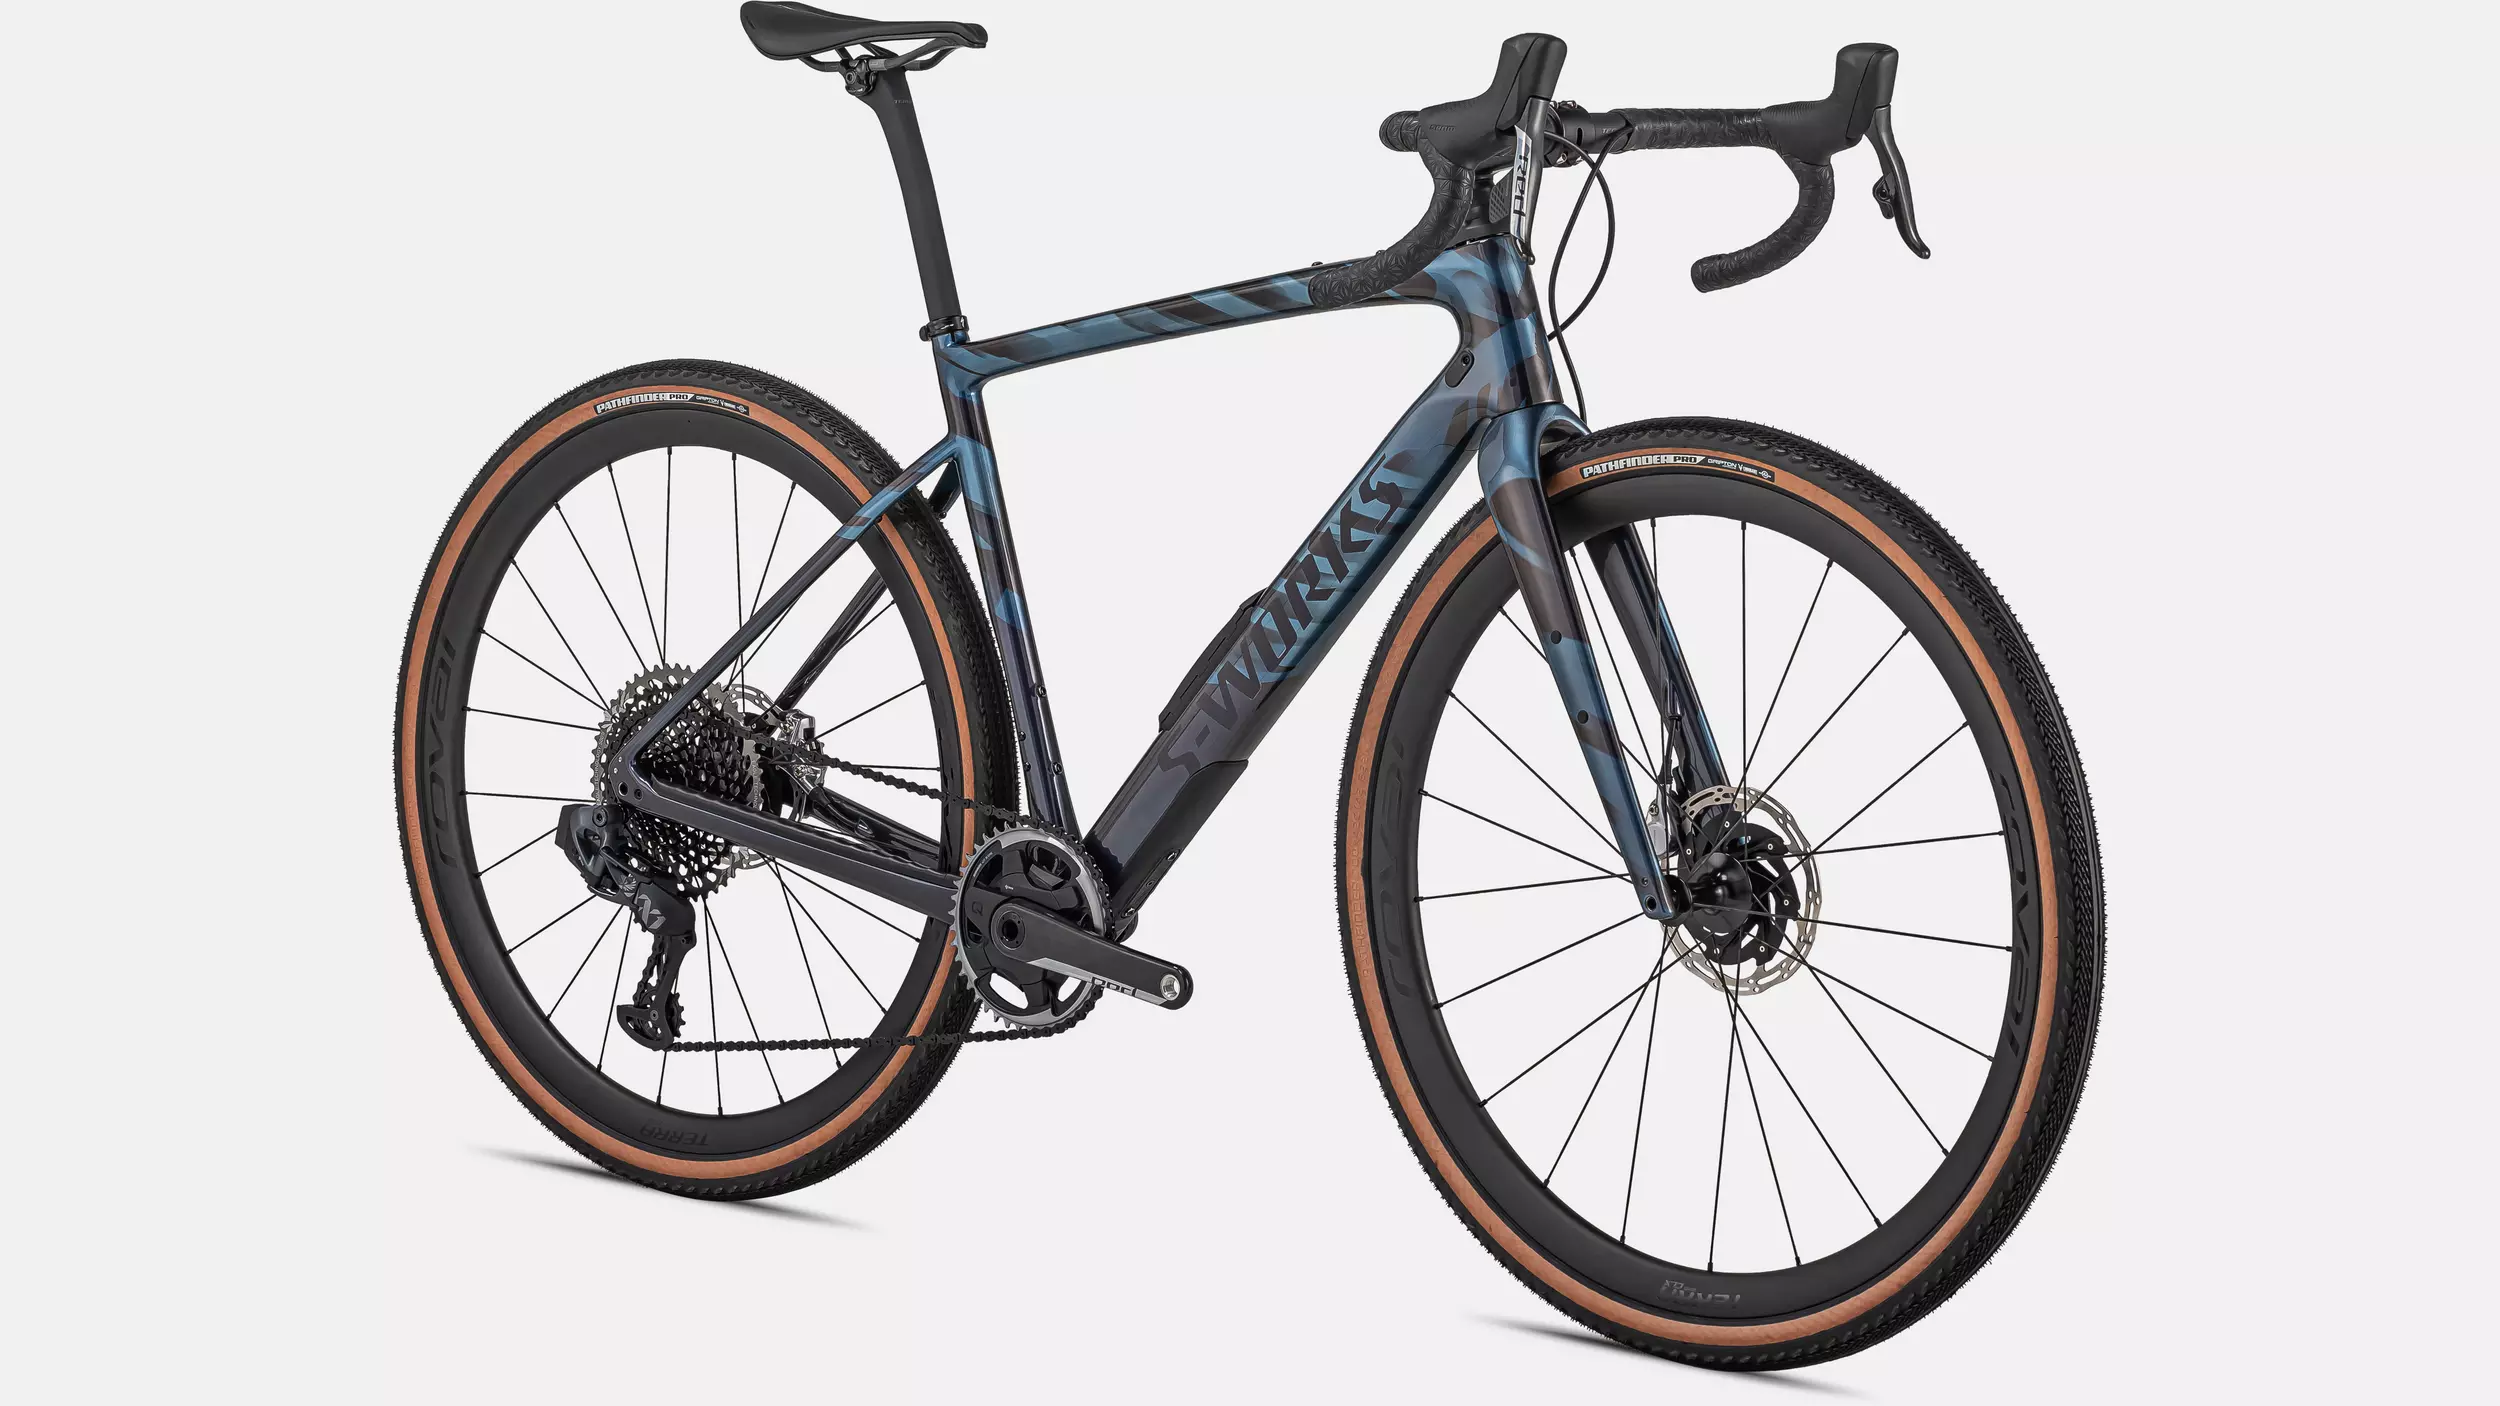 The 2022 Specialized S-Works Diverge Gravel Bike